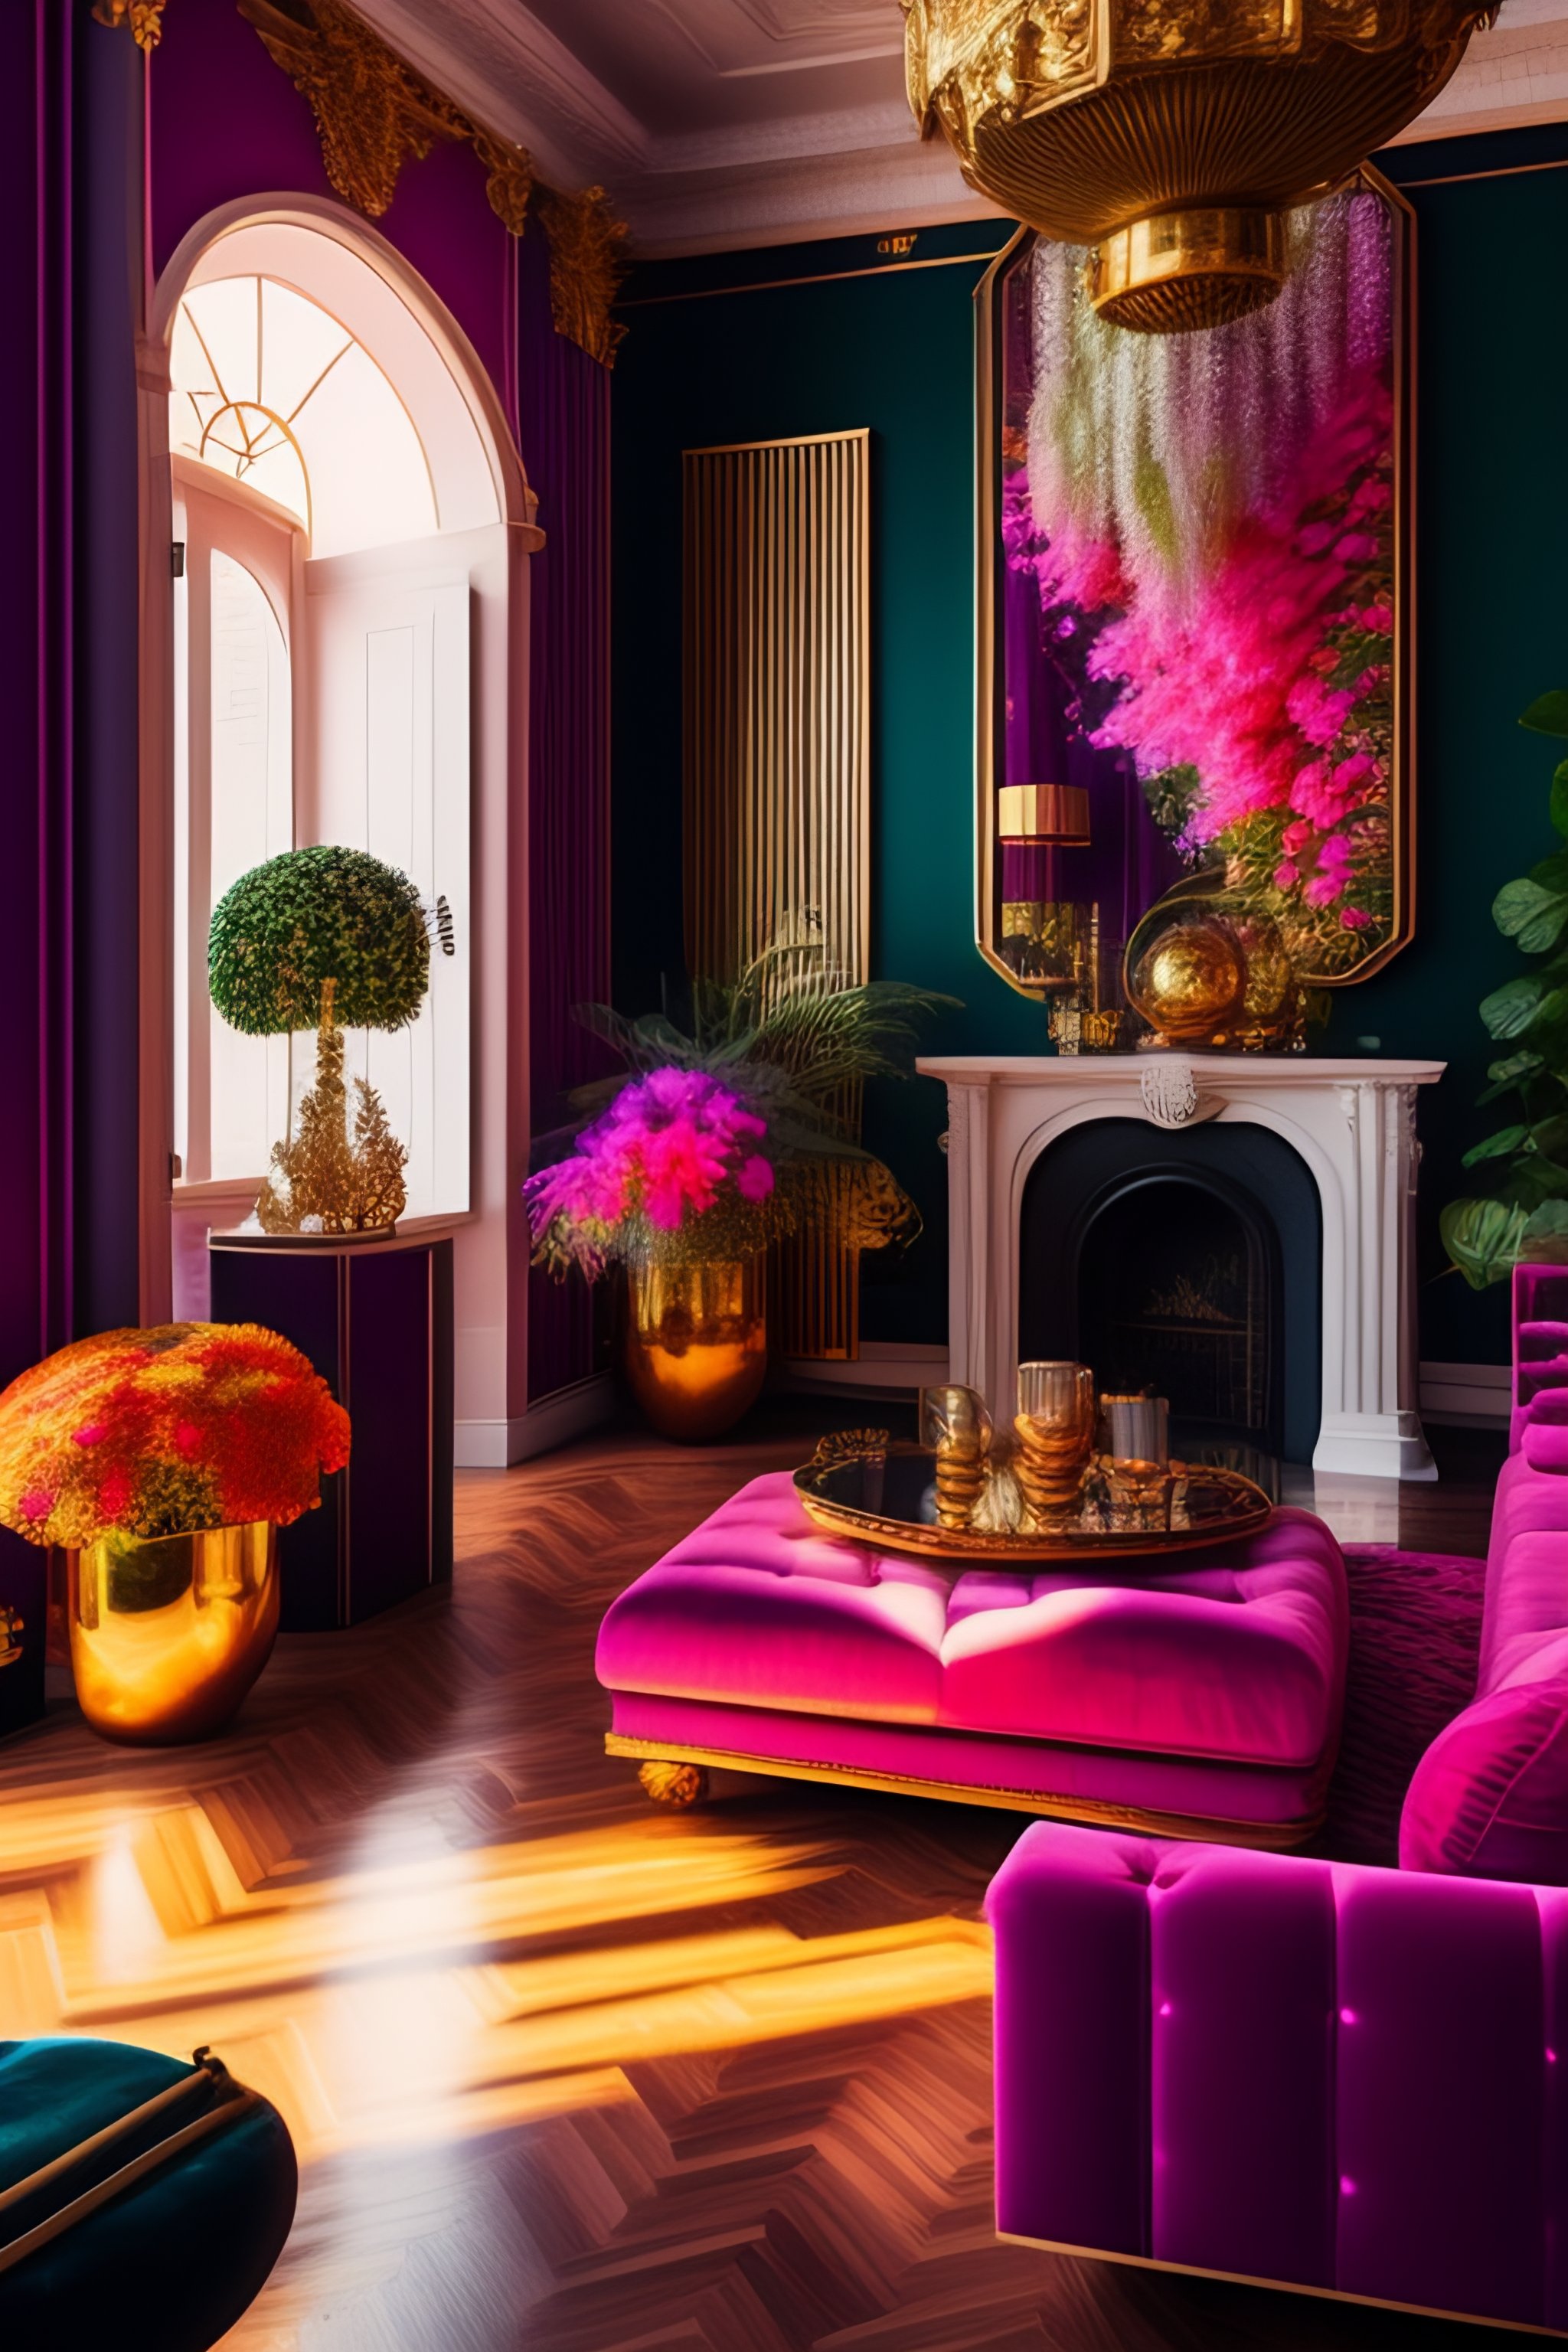 Lexica - Architectural Digest photo of a maximalist infrared {vaporwave ...